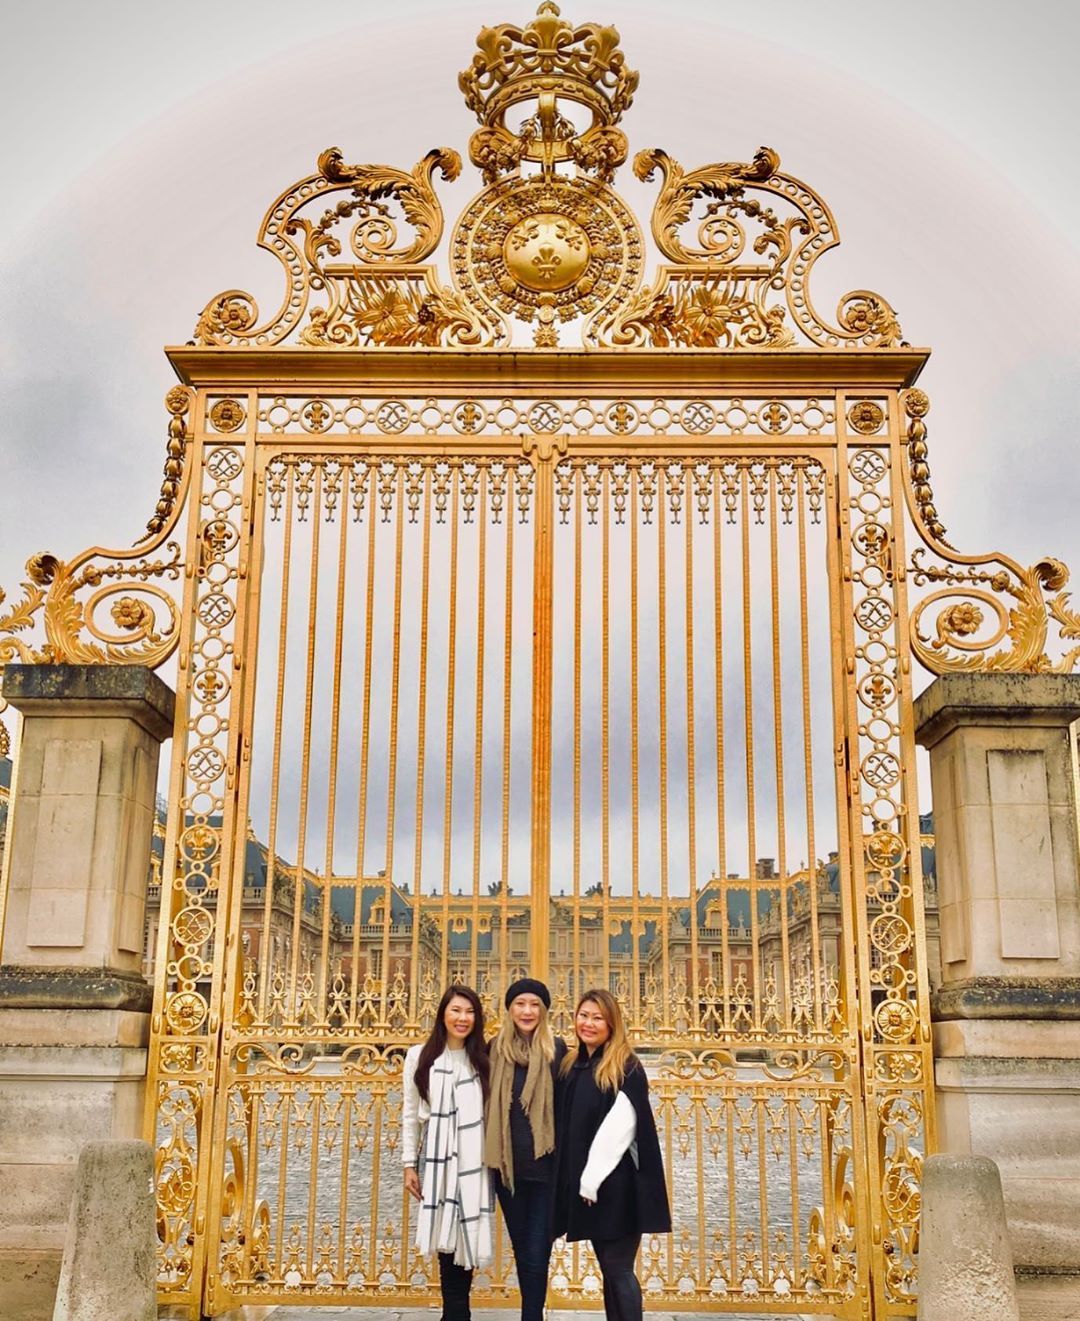 Three women posing in scarves and coats in front of the gate of the Palace of Versailles